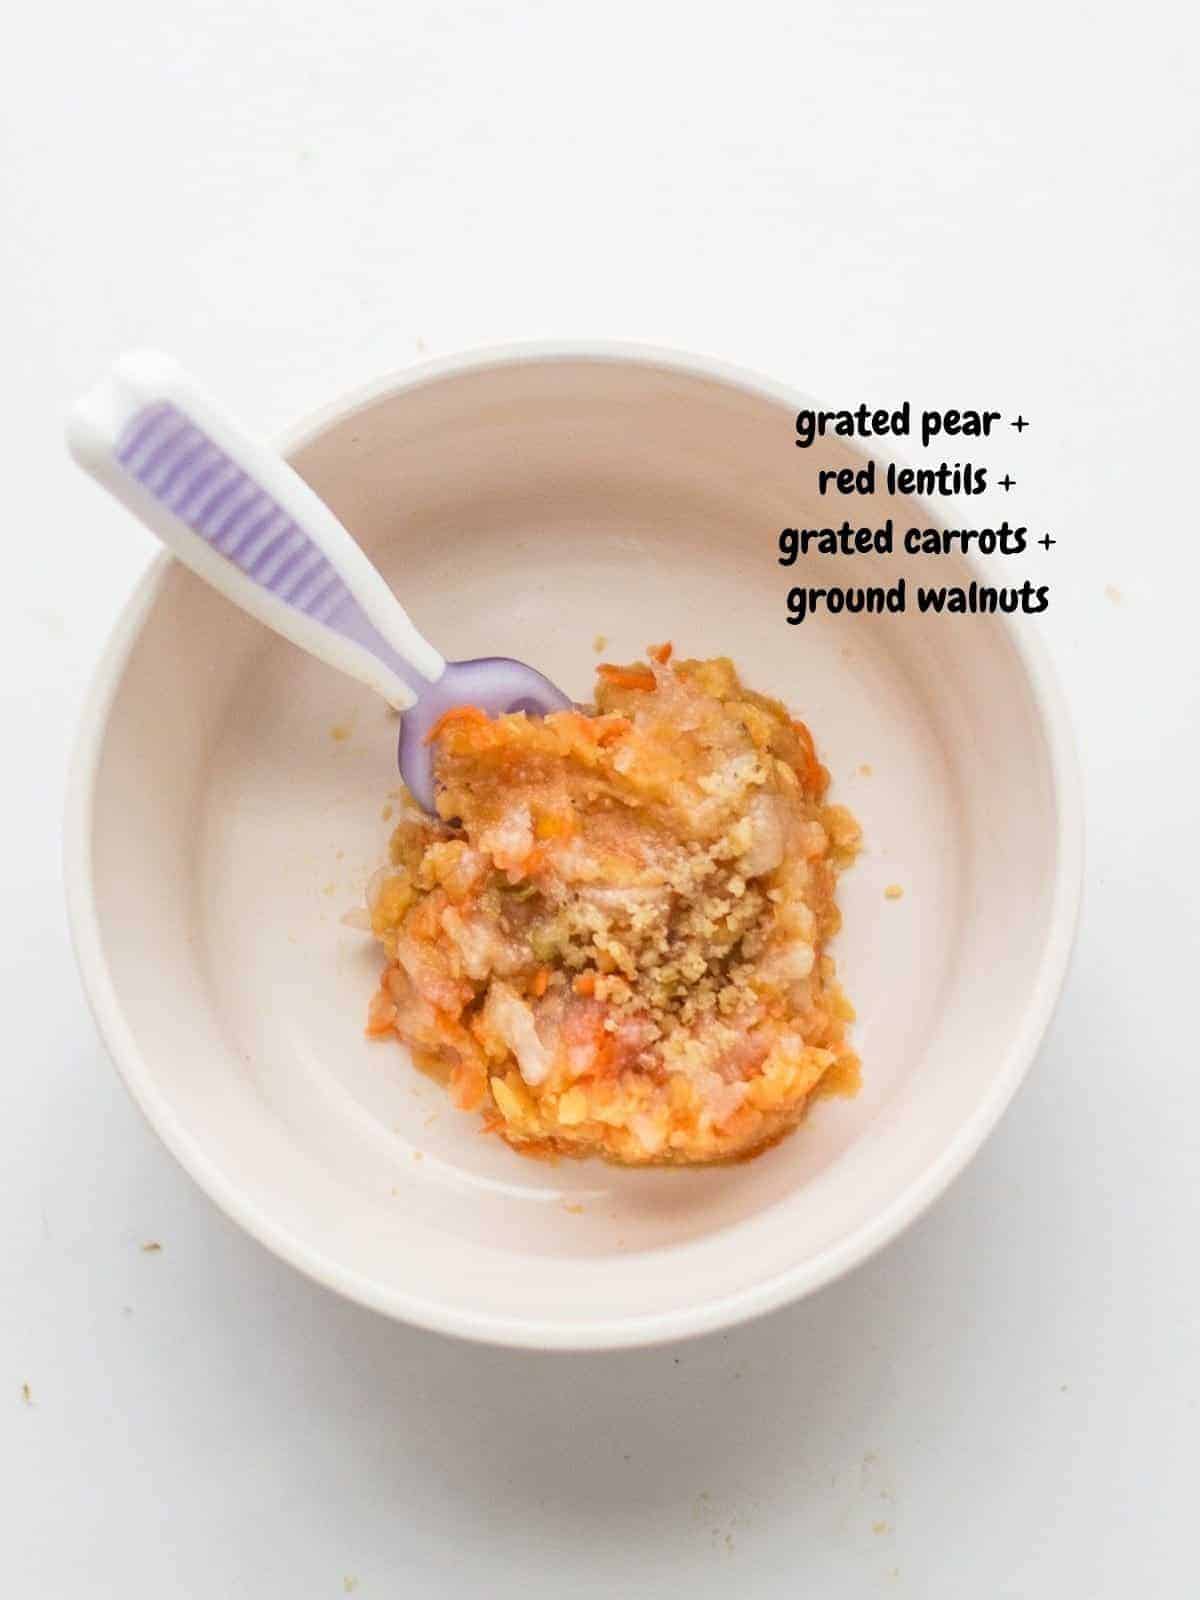 red lentils mixed with grated pears, carrots, and ground walnuts.